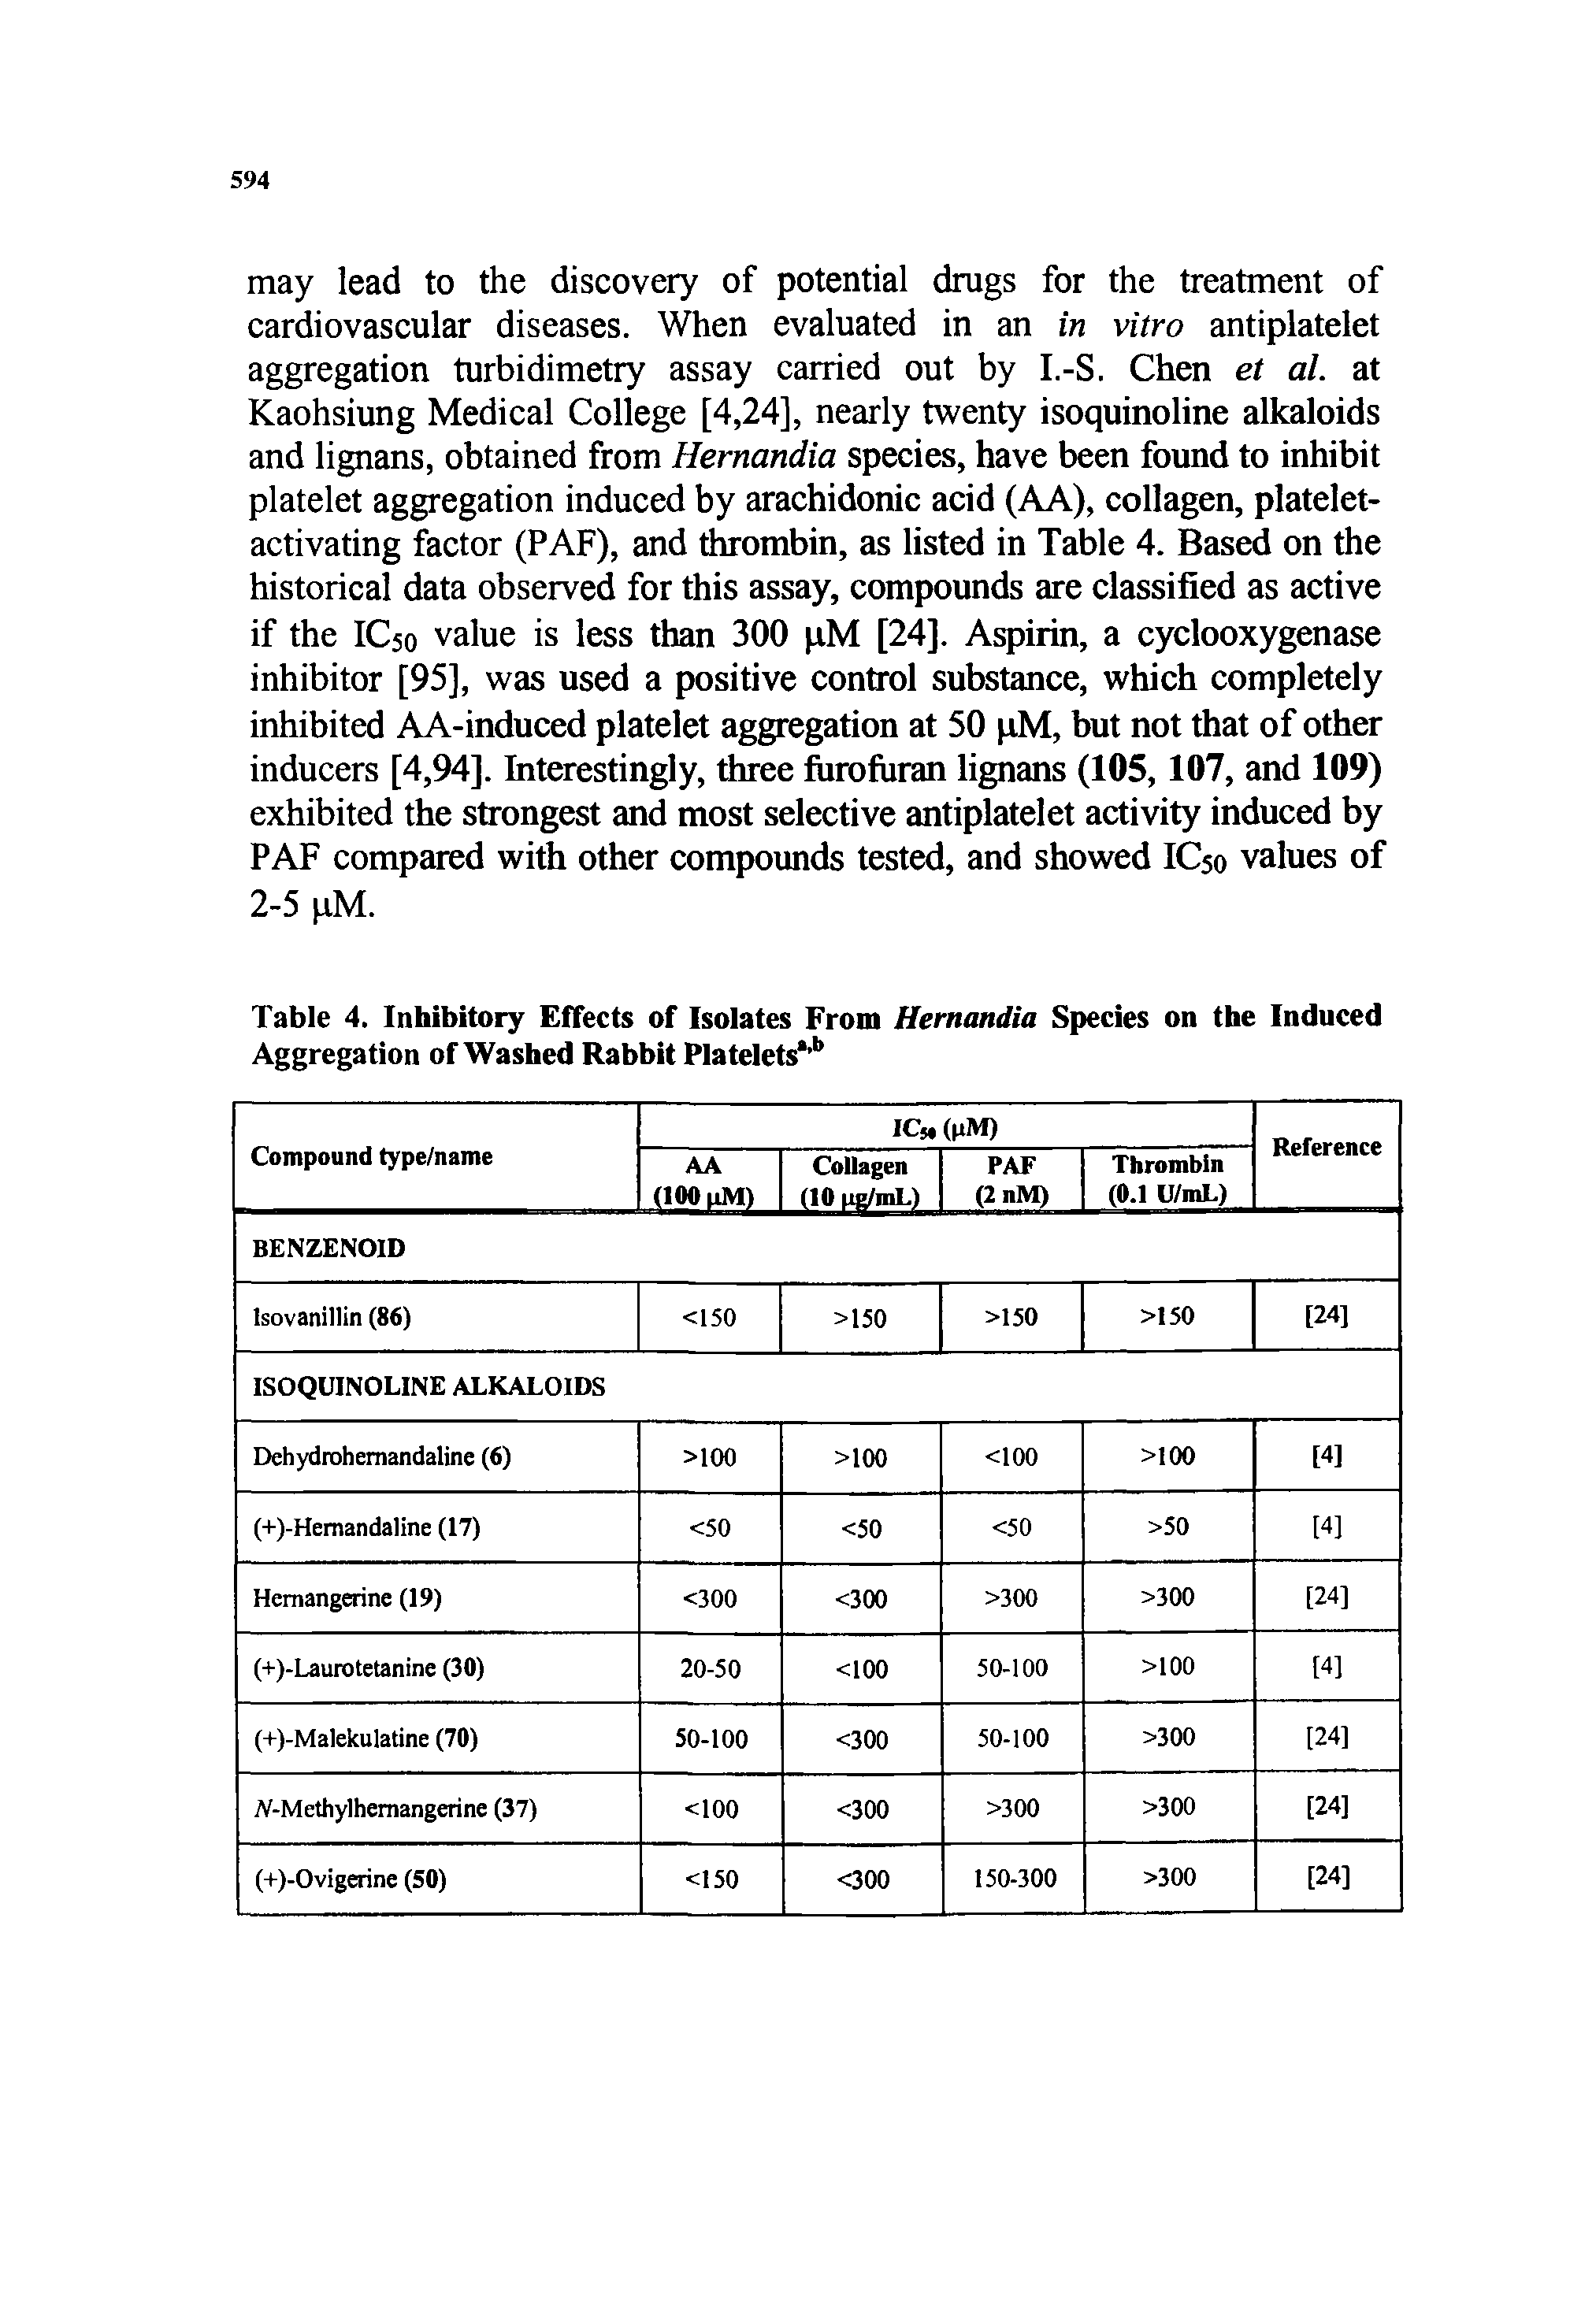 Table 4. Inhibitory Effects of Isolates From Hernandia Species on the Induced Aggregation of Washed Rabbit Platelets b...